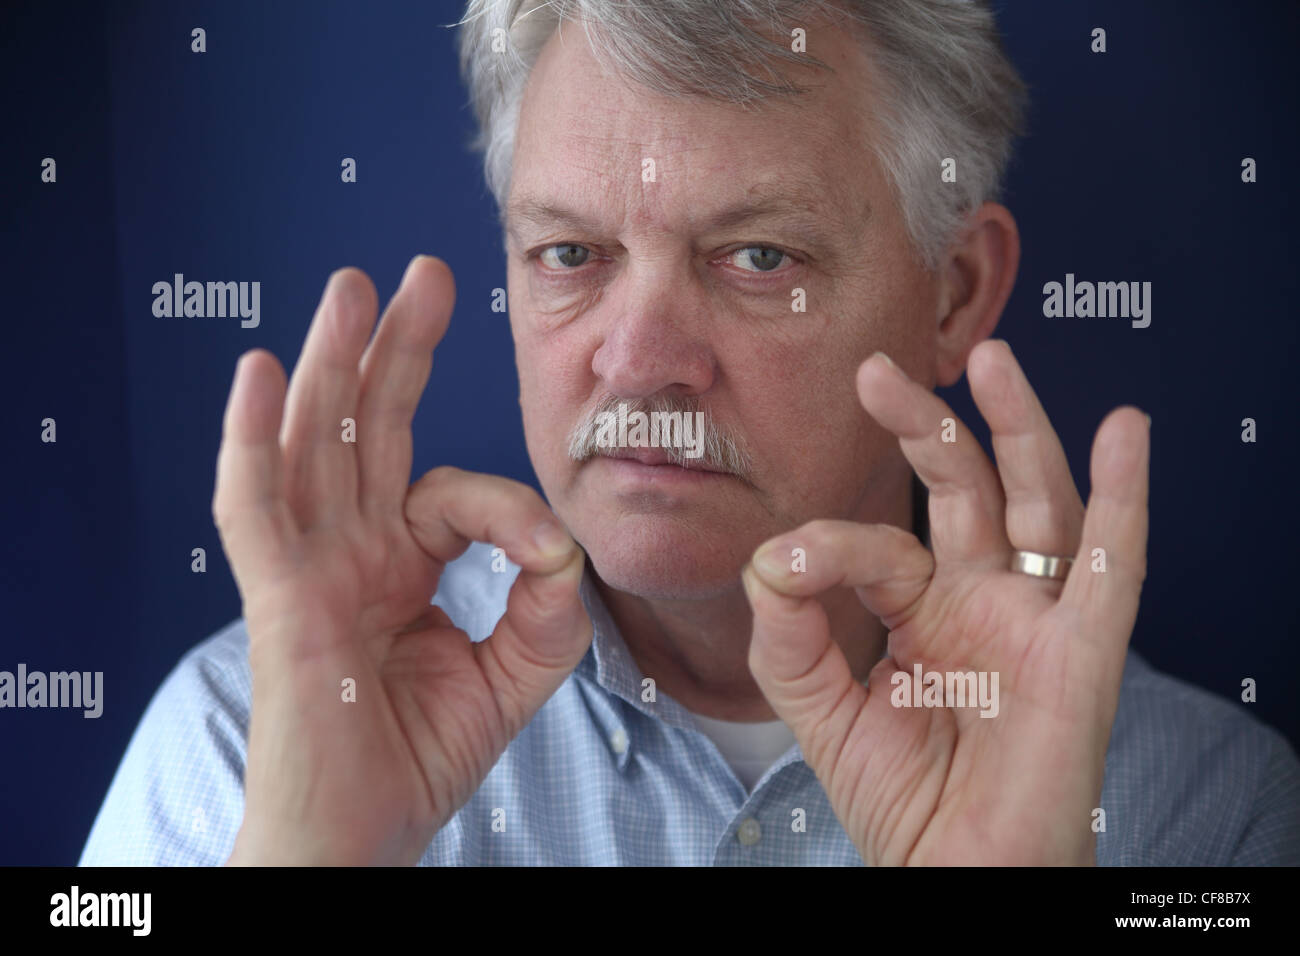 man gives positive hand gestures Stock Photo